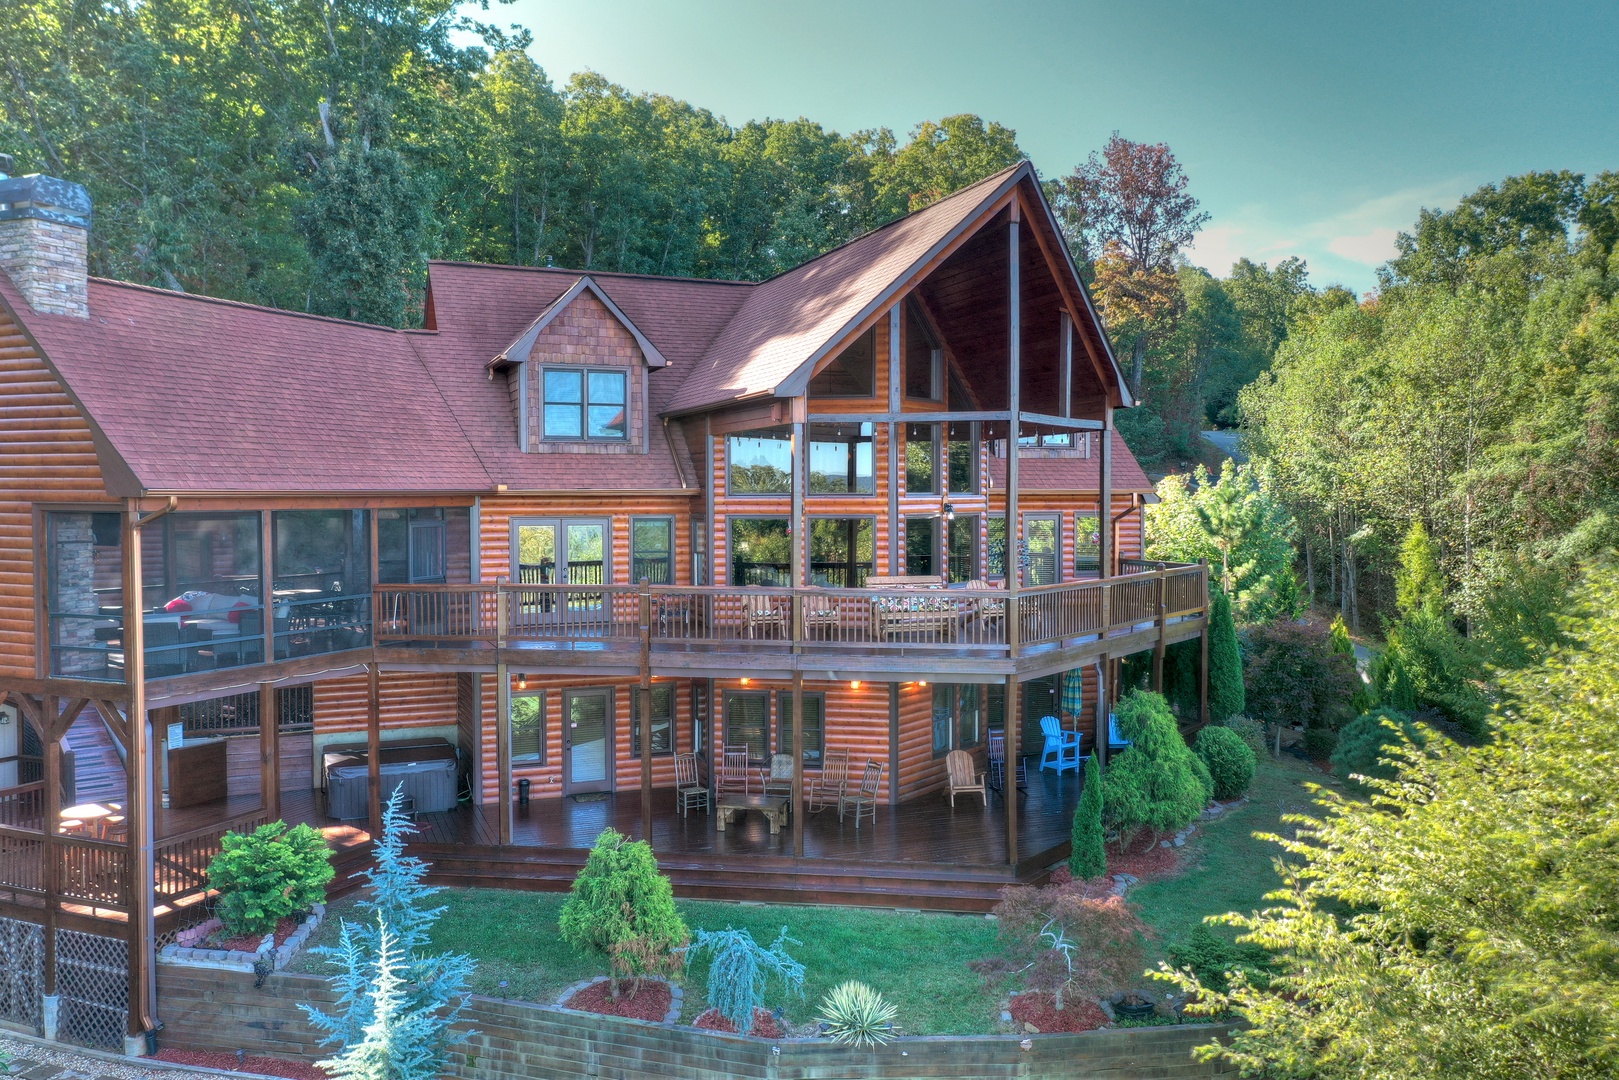 Fraggle Rock Vacation Rental By Southern Comfort Cabin Rentals